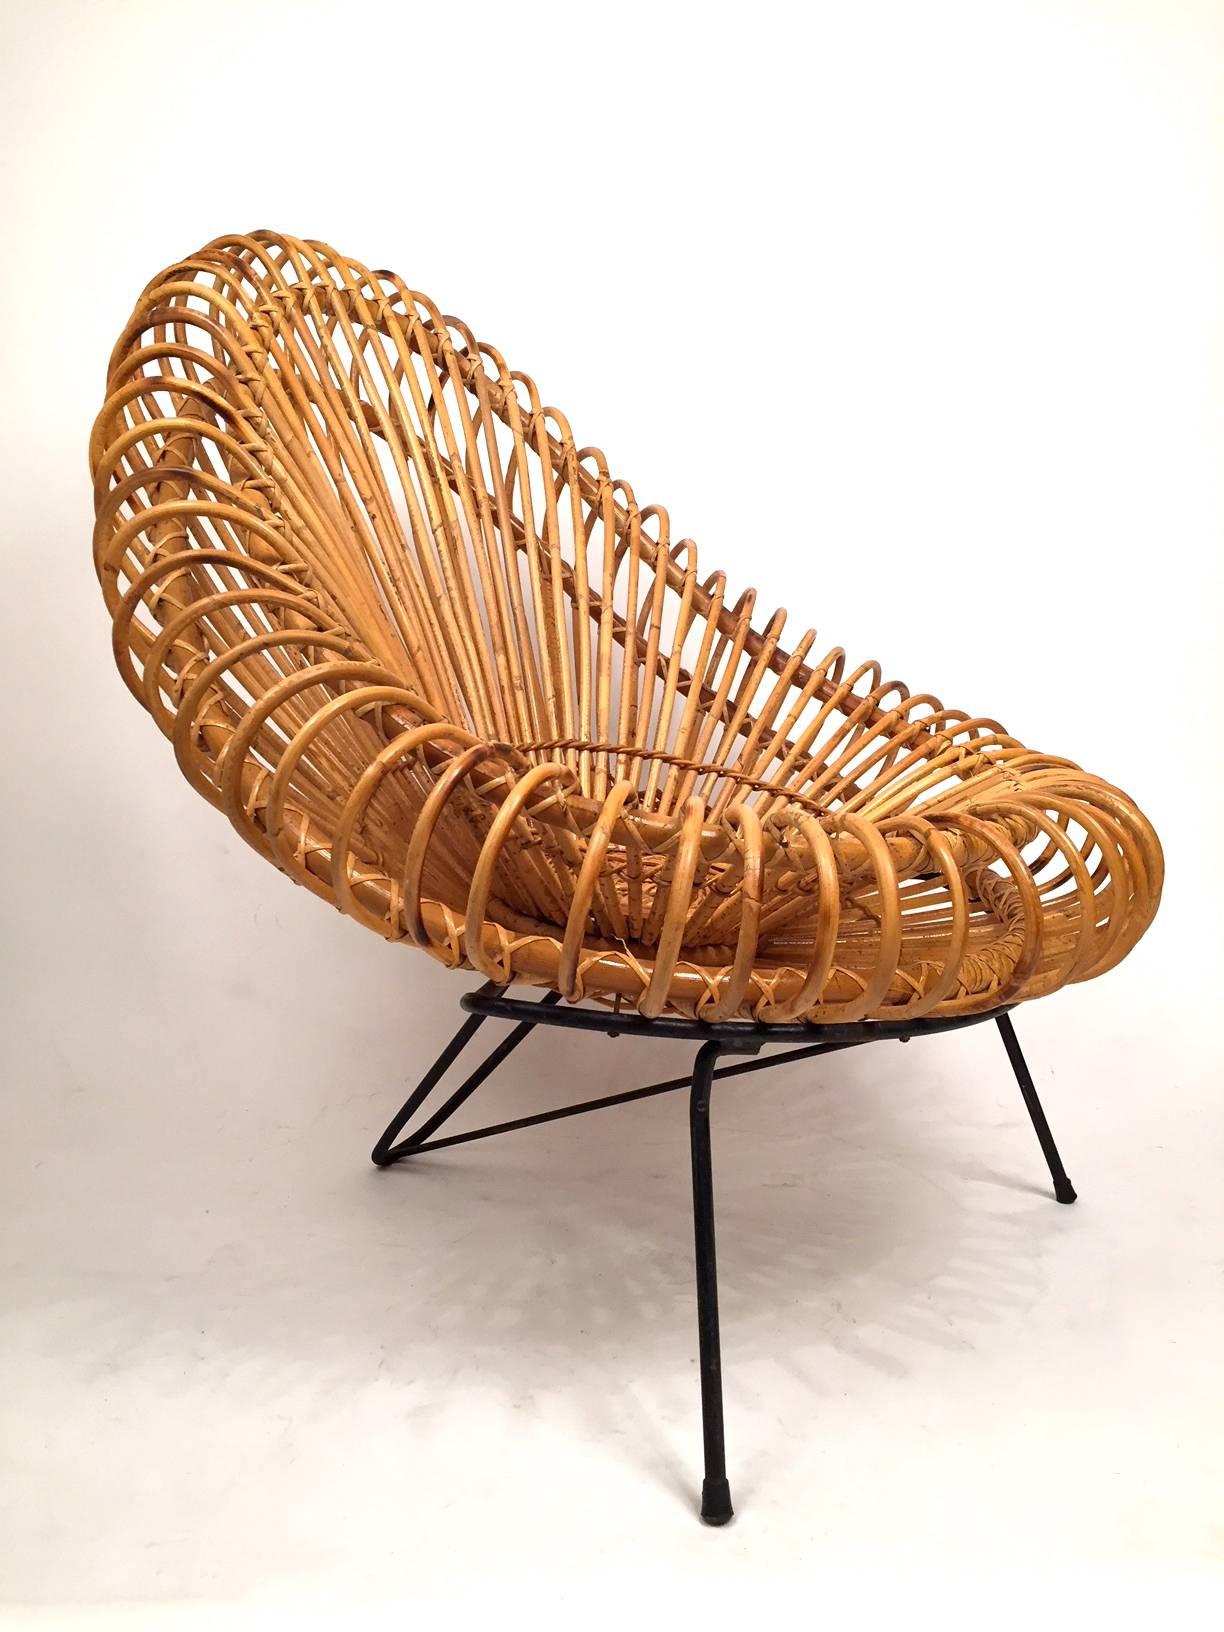 Metal Pair of Janine Abraham and Dirk Jan Rol Basketware Lounge Chairs